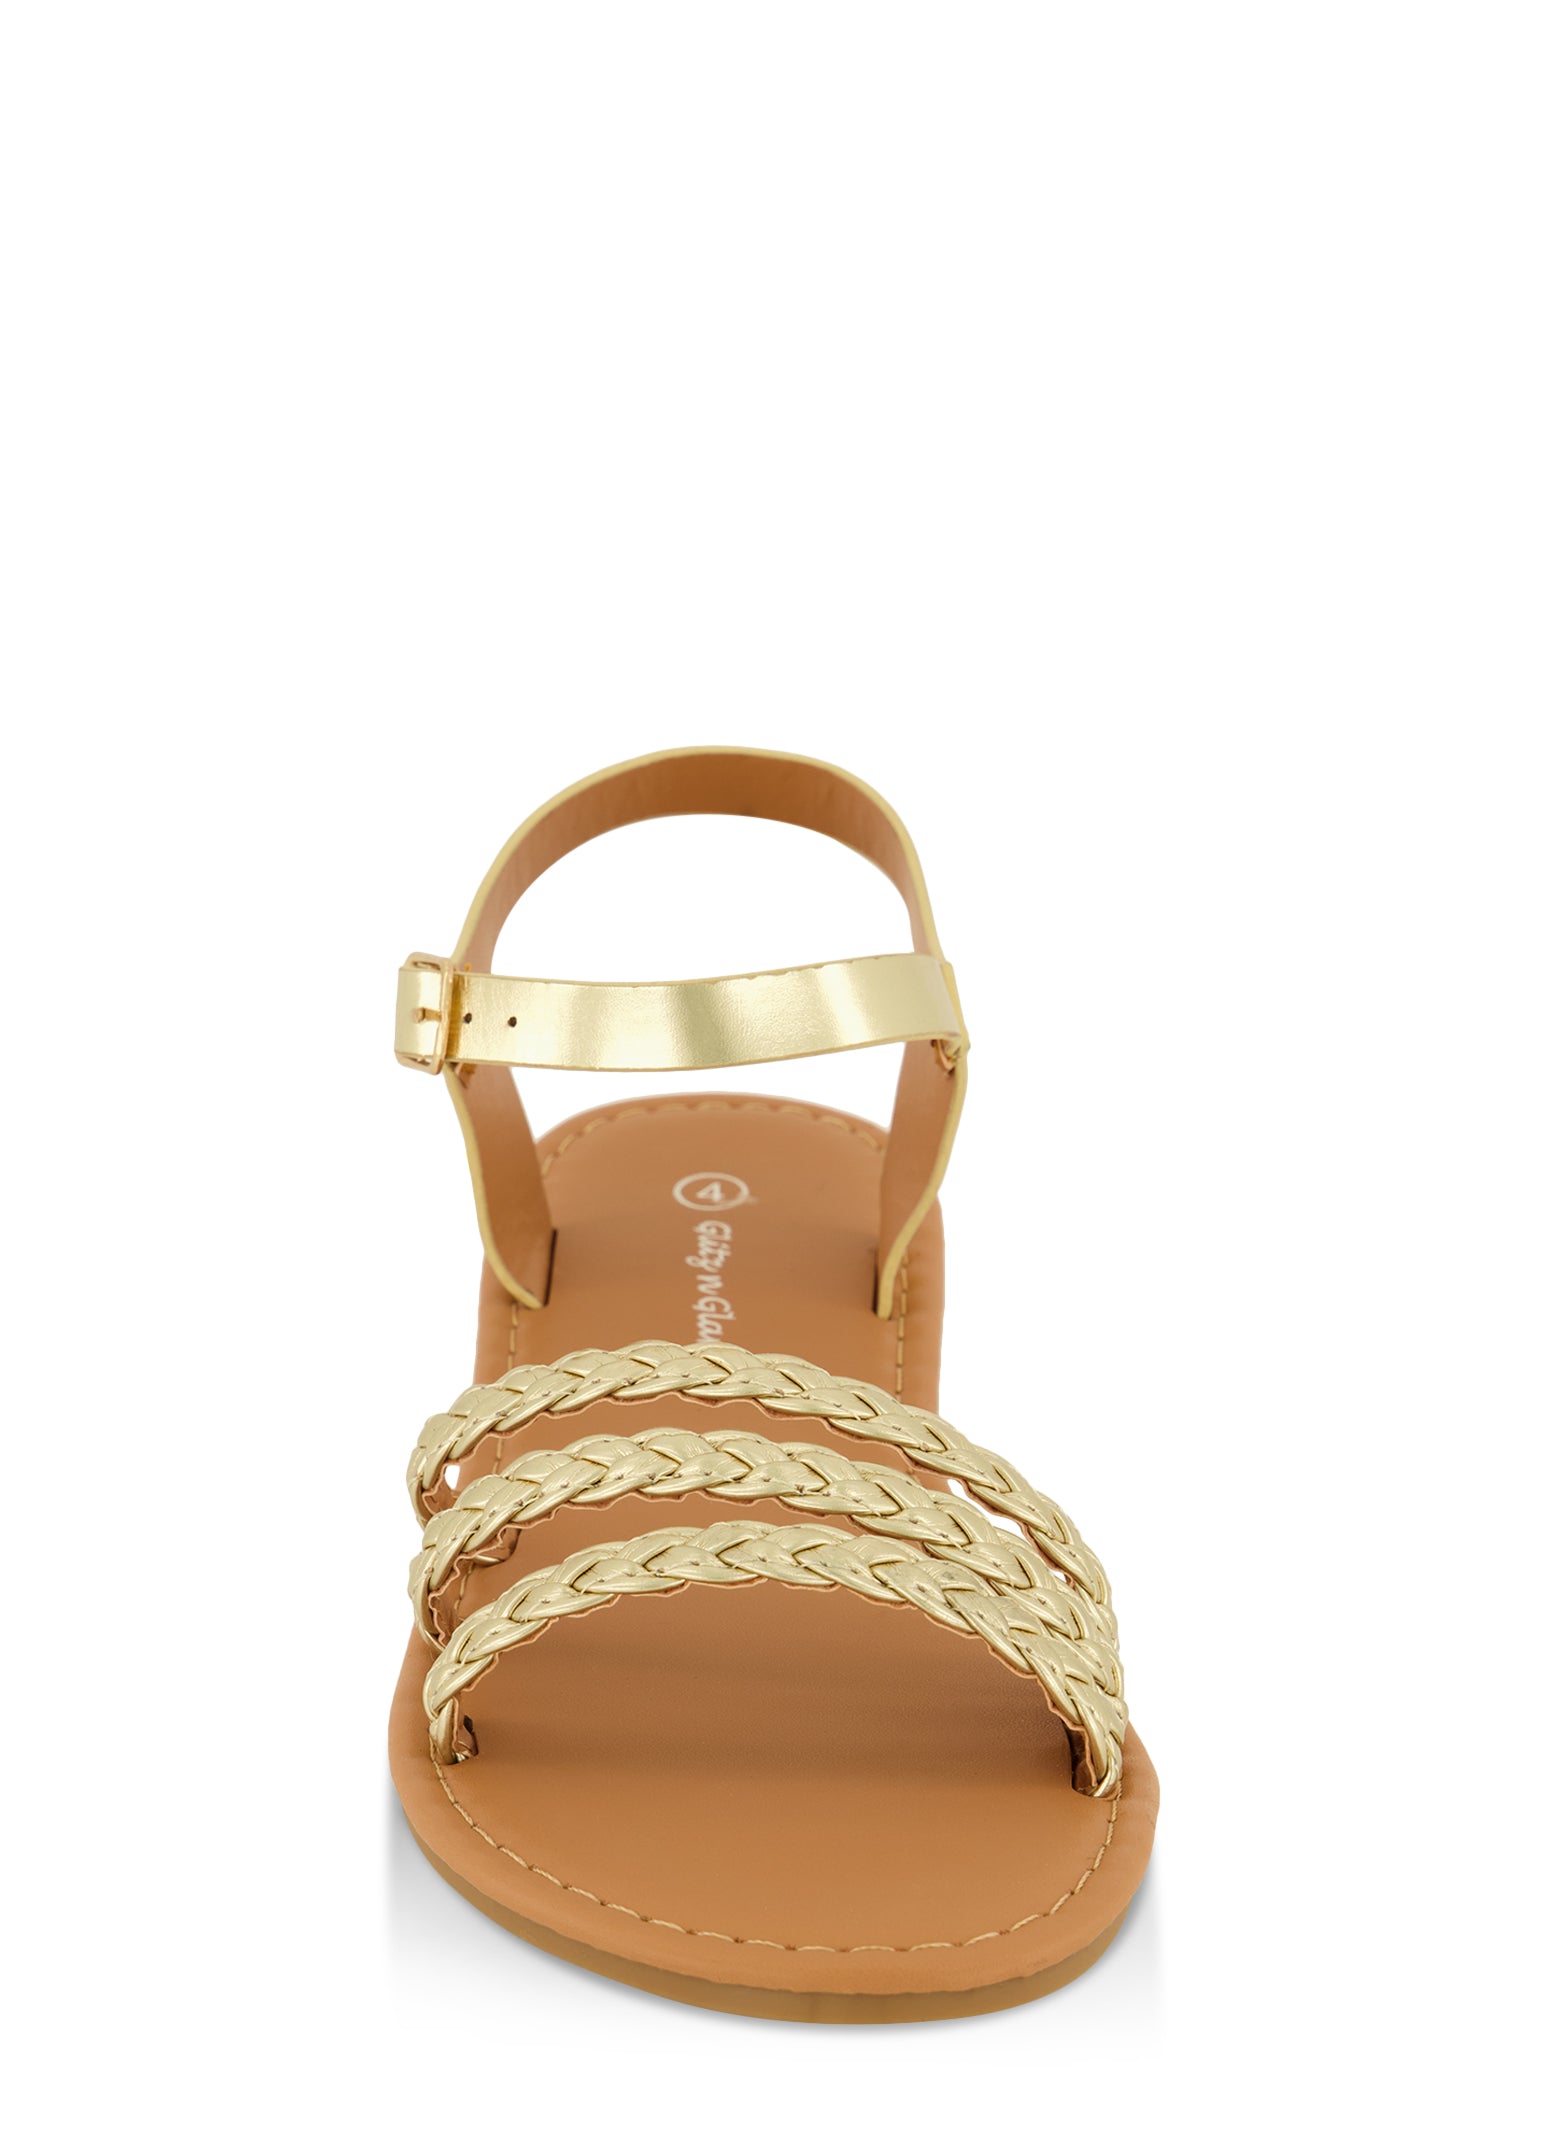 Womens Girls Braided Strappy Ankle Strap Sandals,